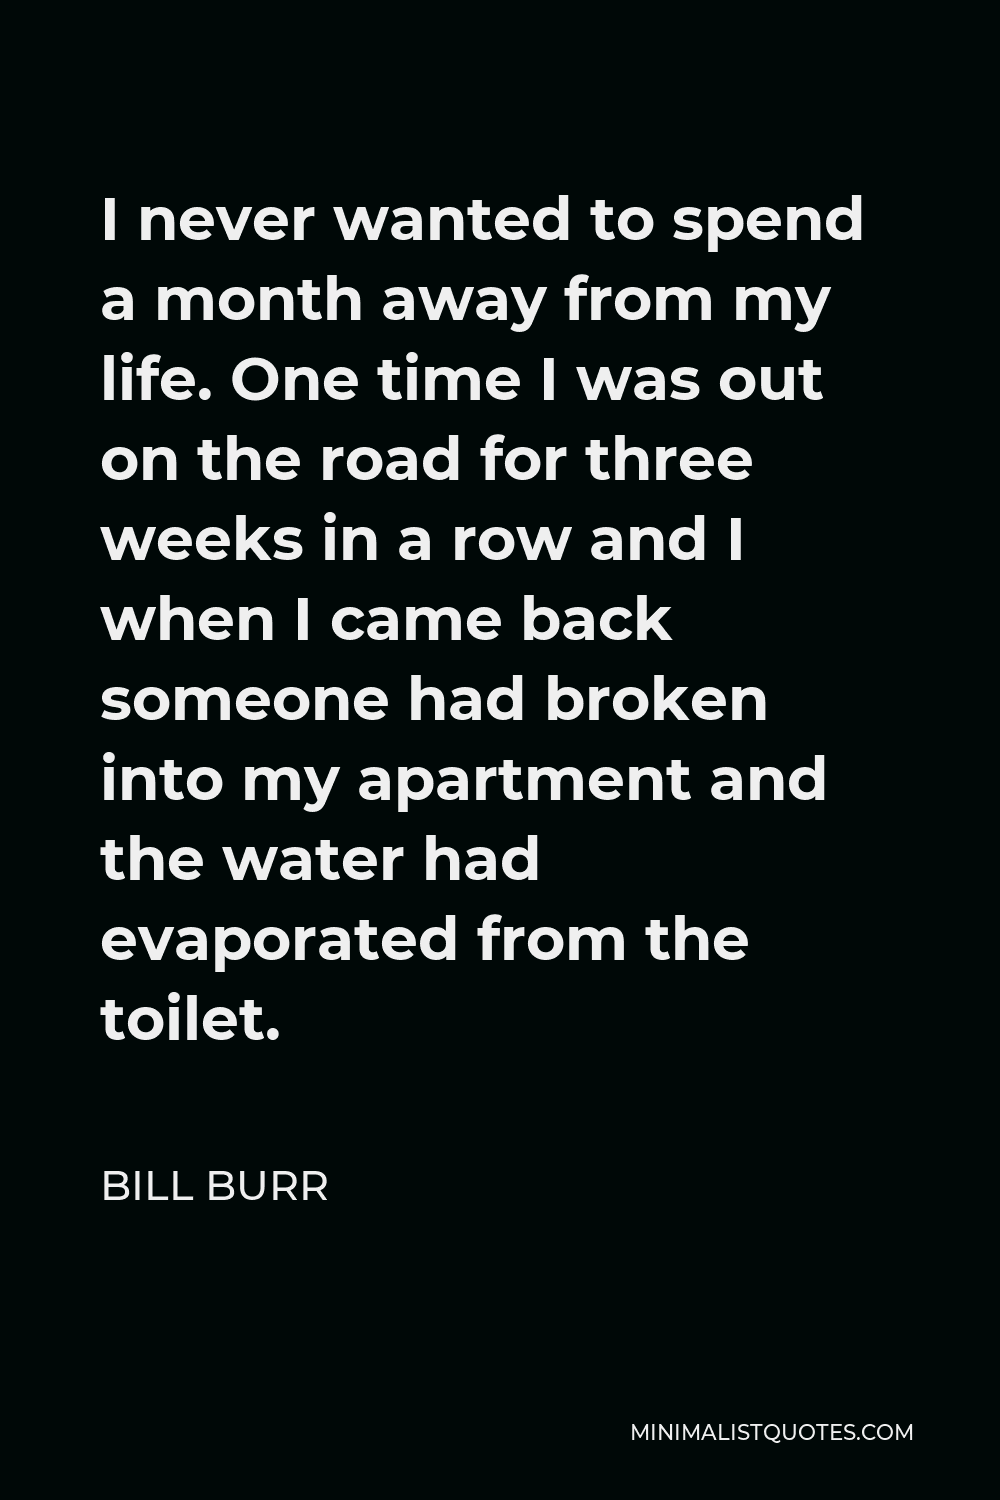 Bill Burr Quote - I never wanted to spend a month away from my life. One time I was out on the road for three weeks in a row and I when I came back someone had broken into my apartment and the water had evaporated from the toilet.